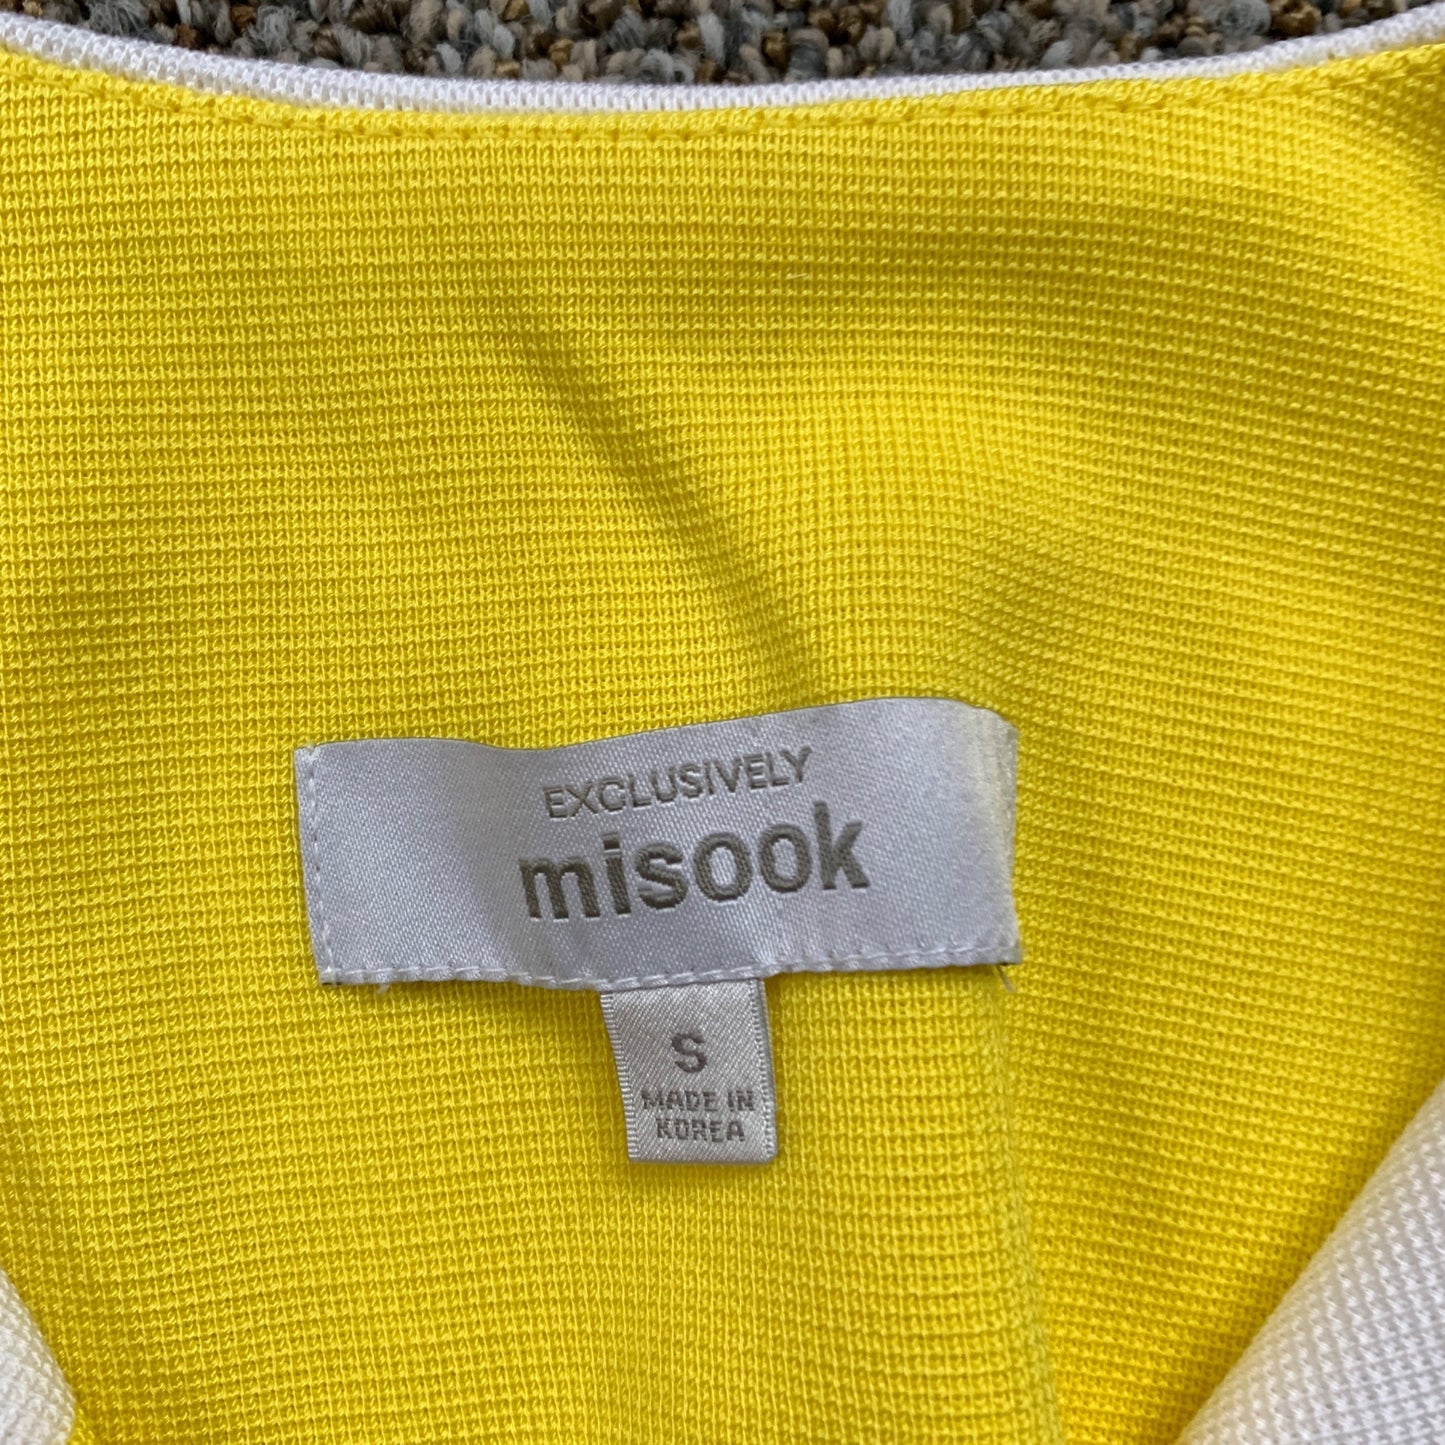 MISOOK Knit Yellow STRIPED Coat Jacket 60s Look Small